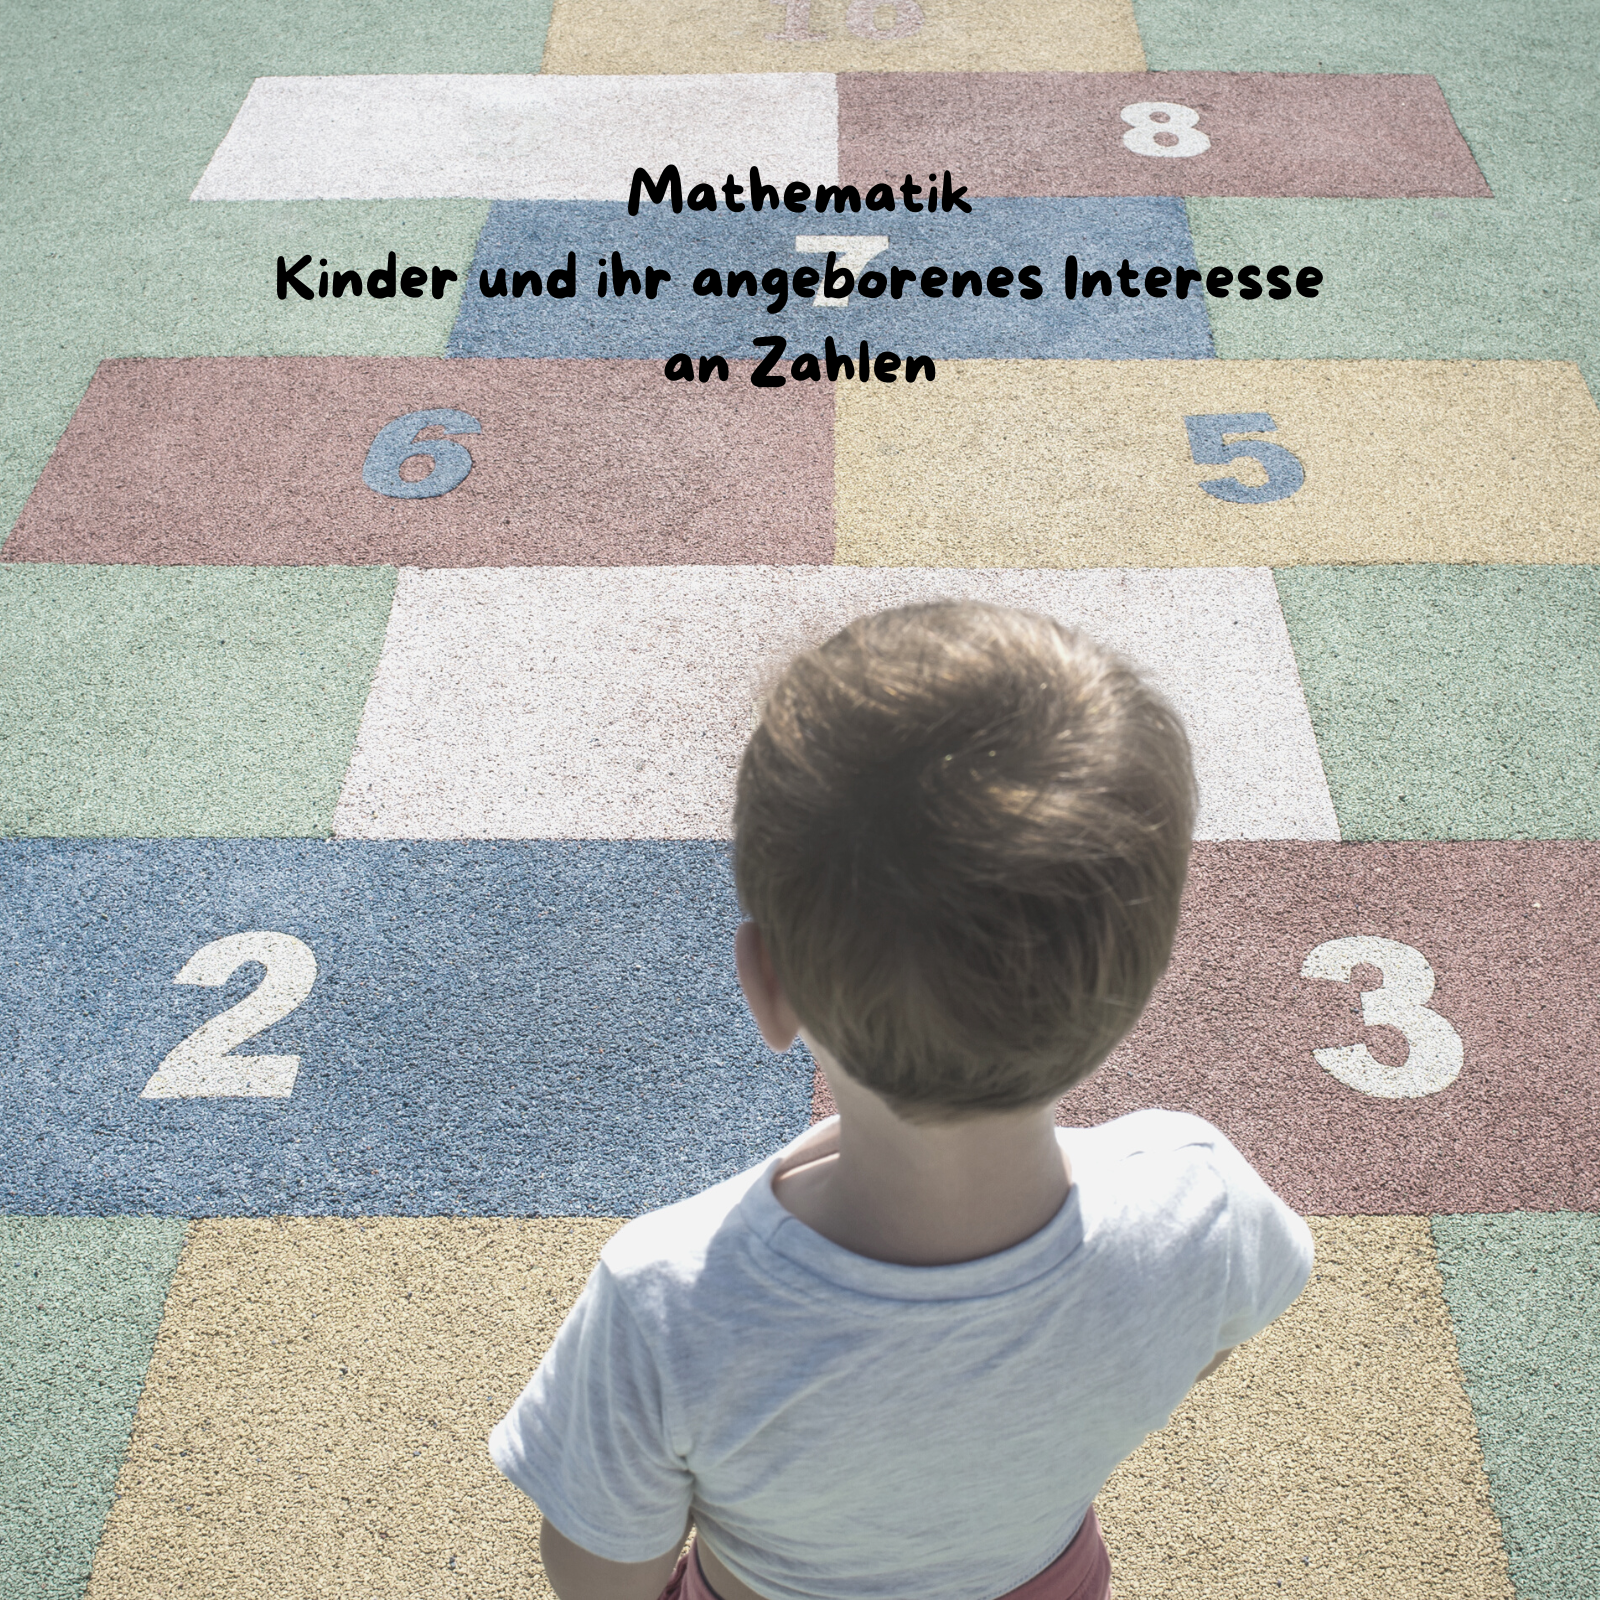 Mathematics - every child has an innate interest in numbers!